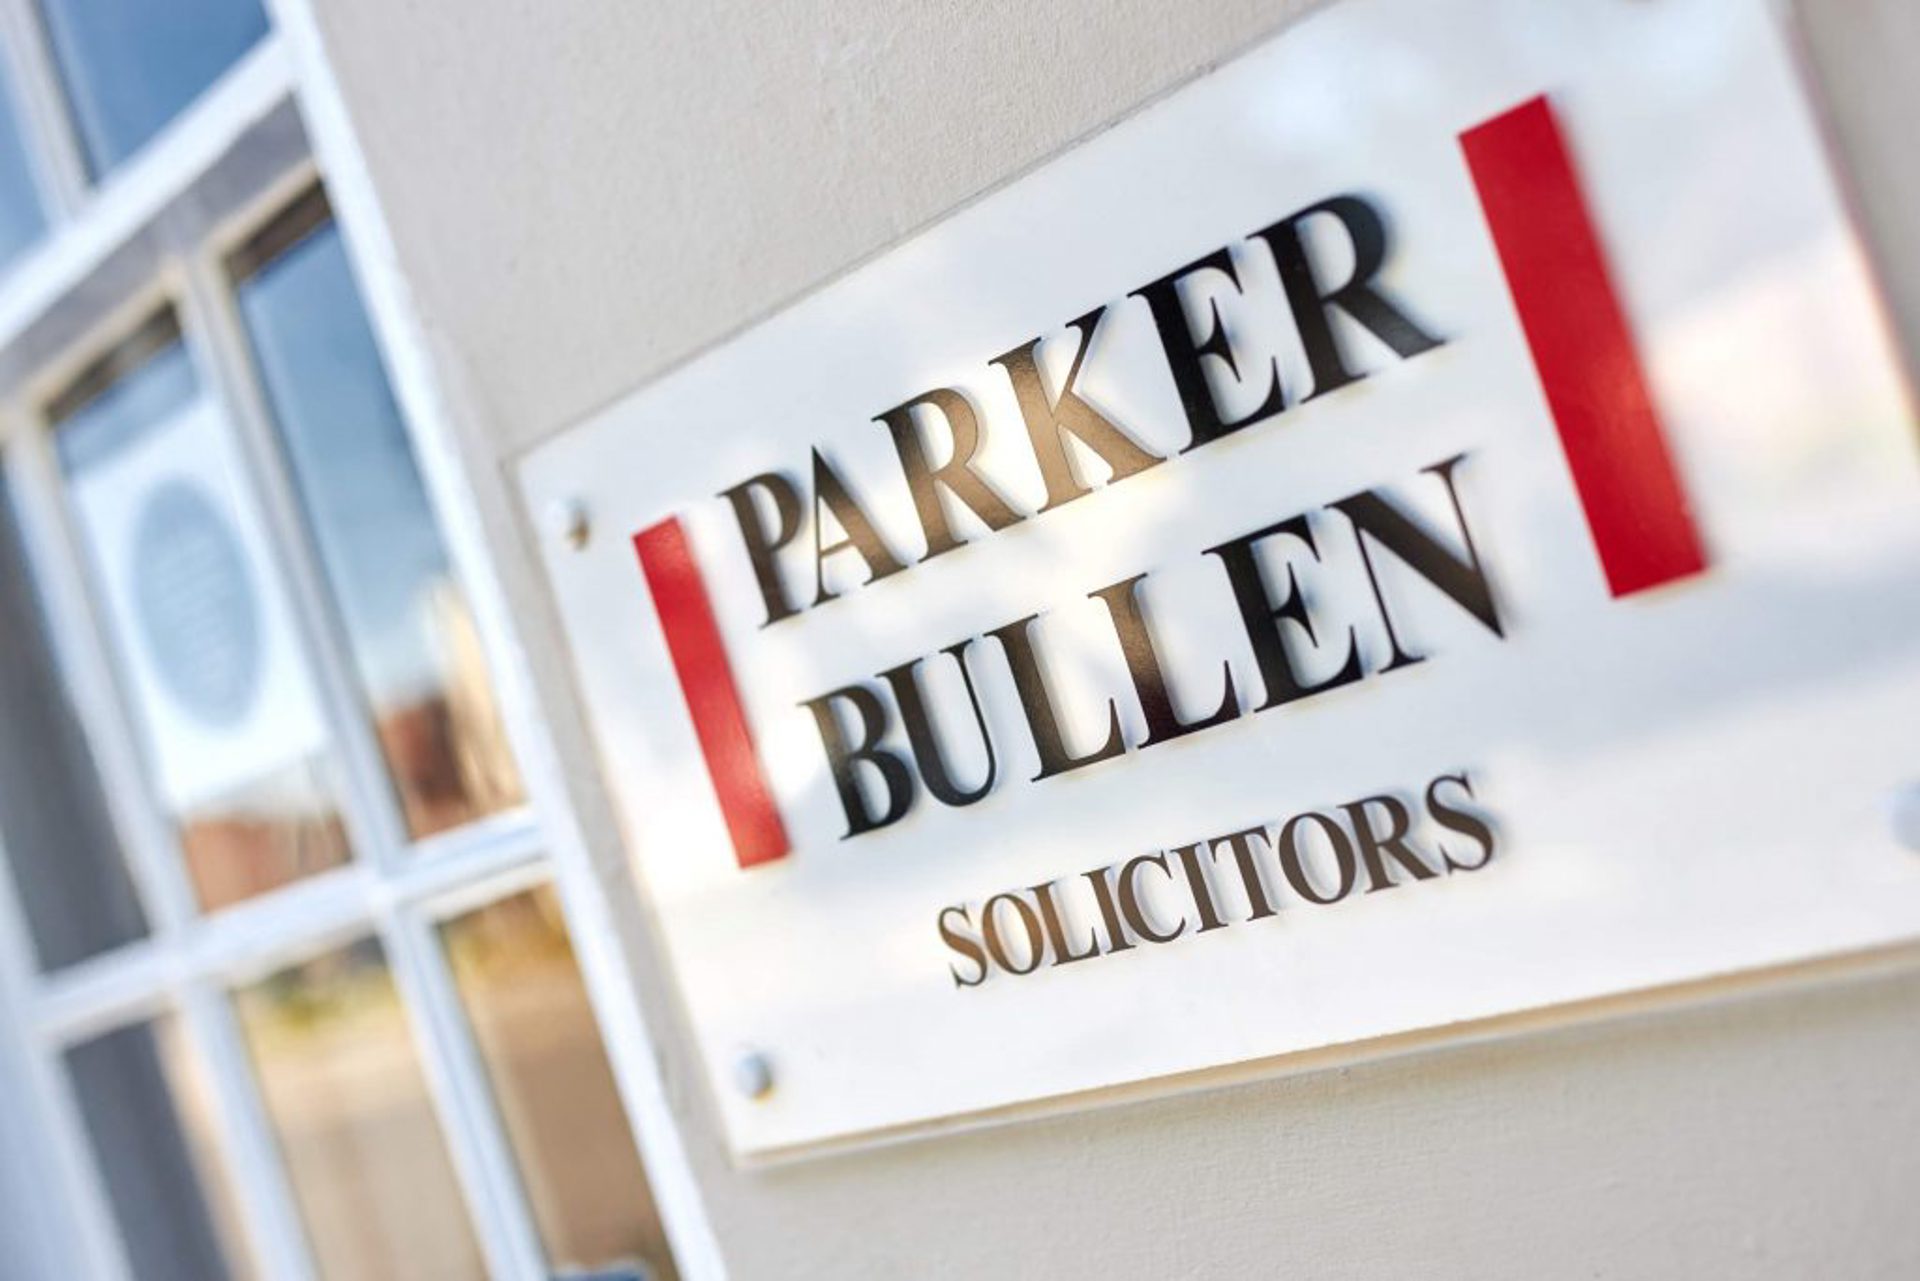 A sign for Parker Bullen solicitors in Salisbury